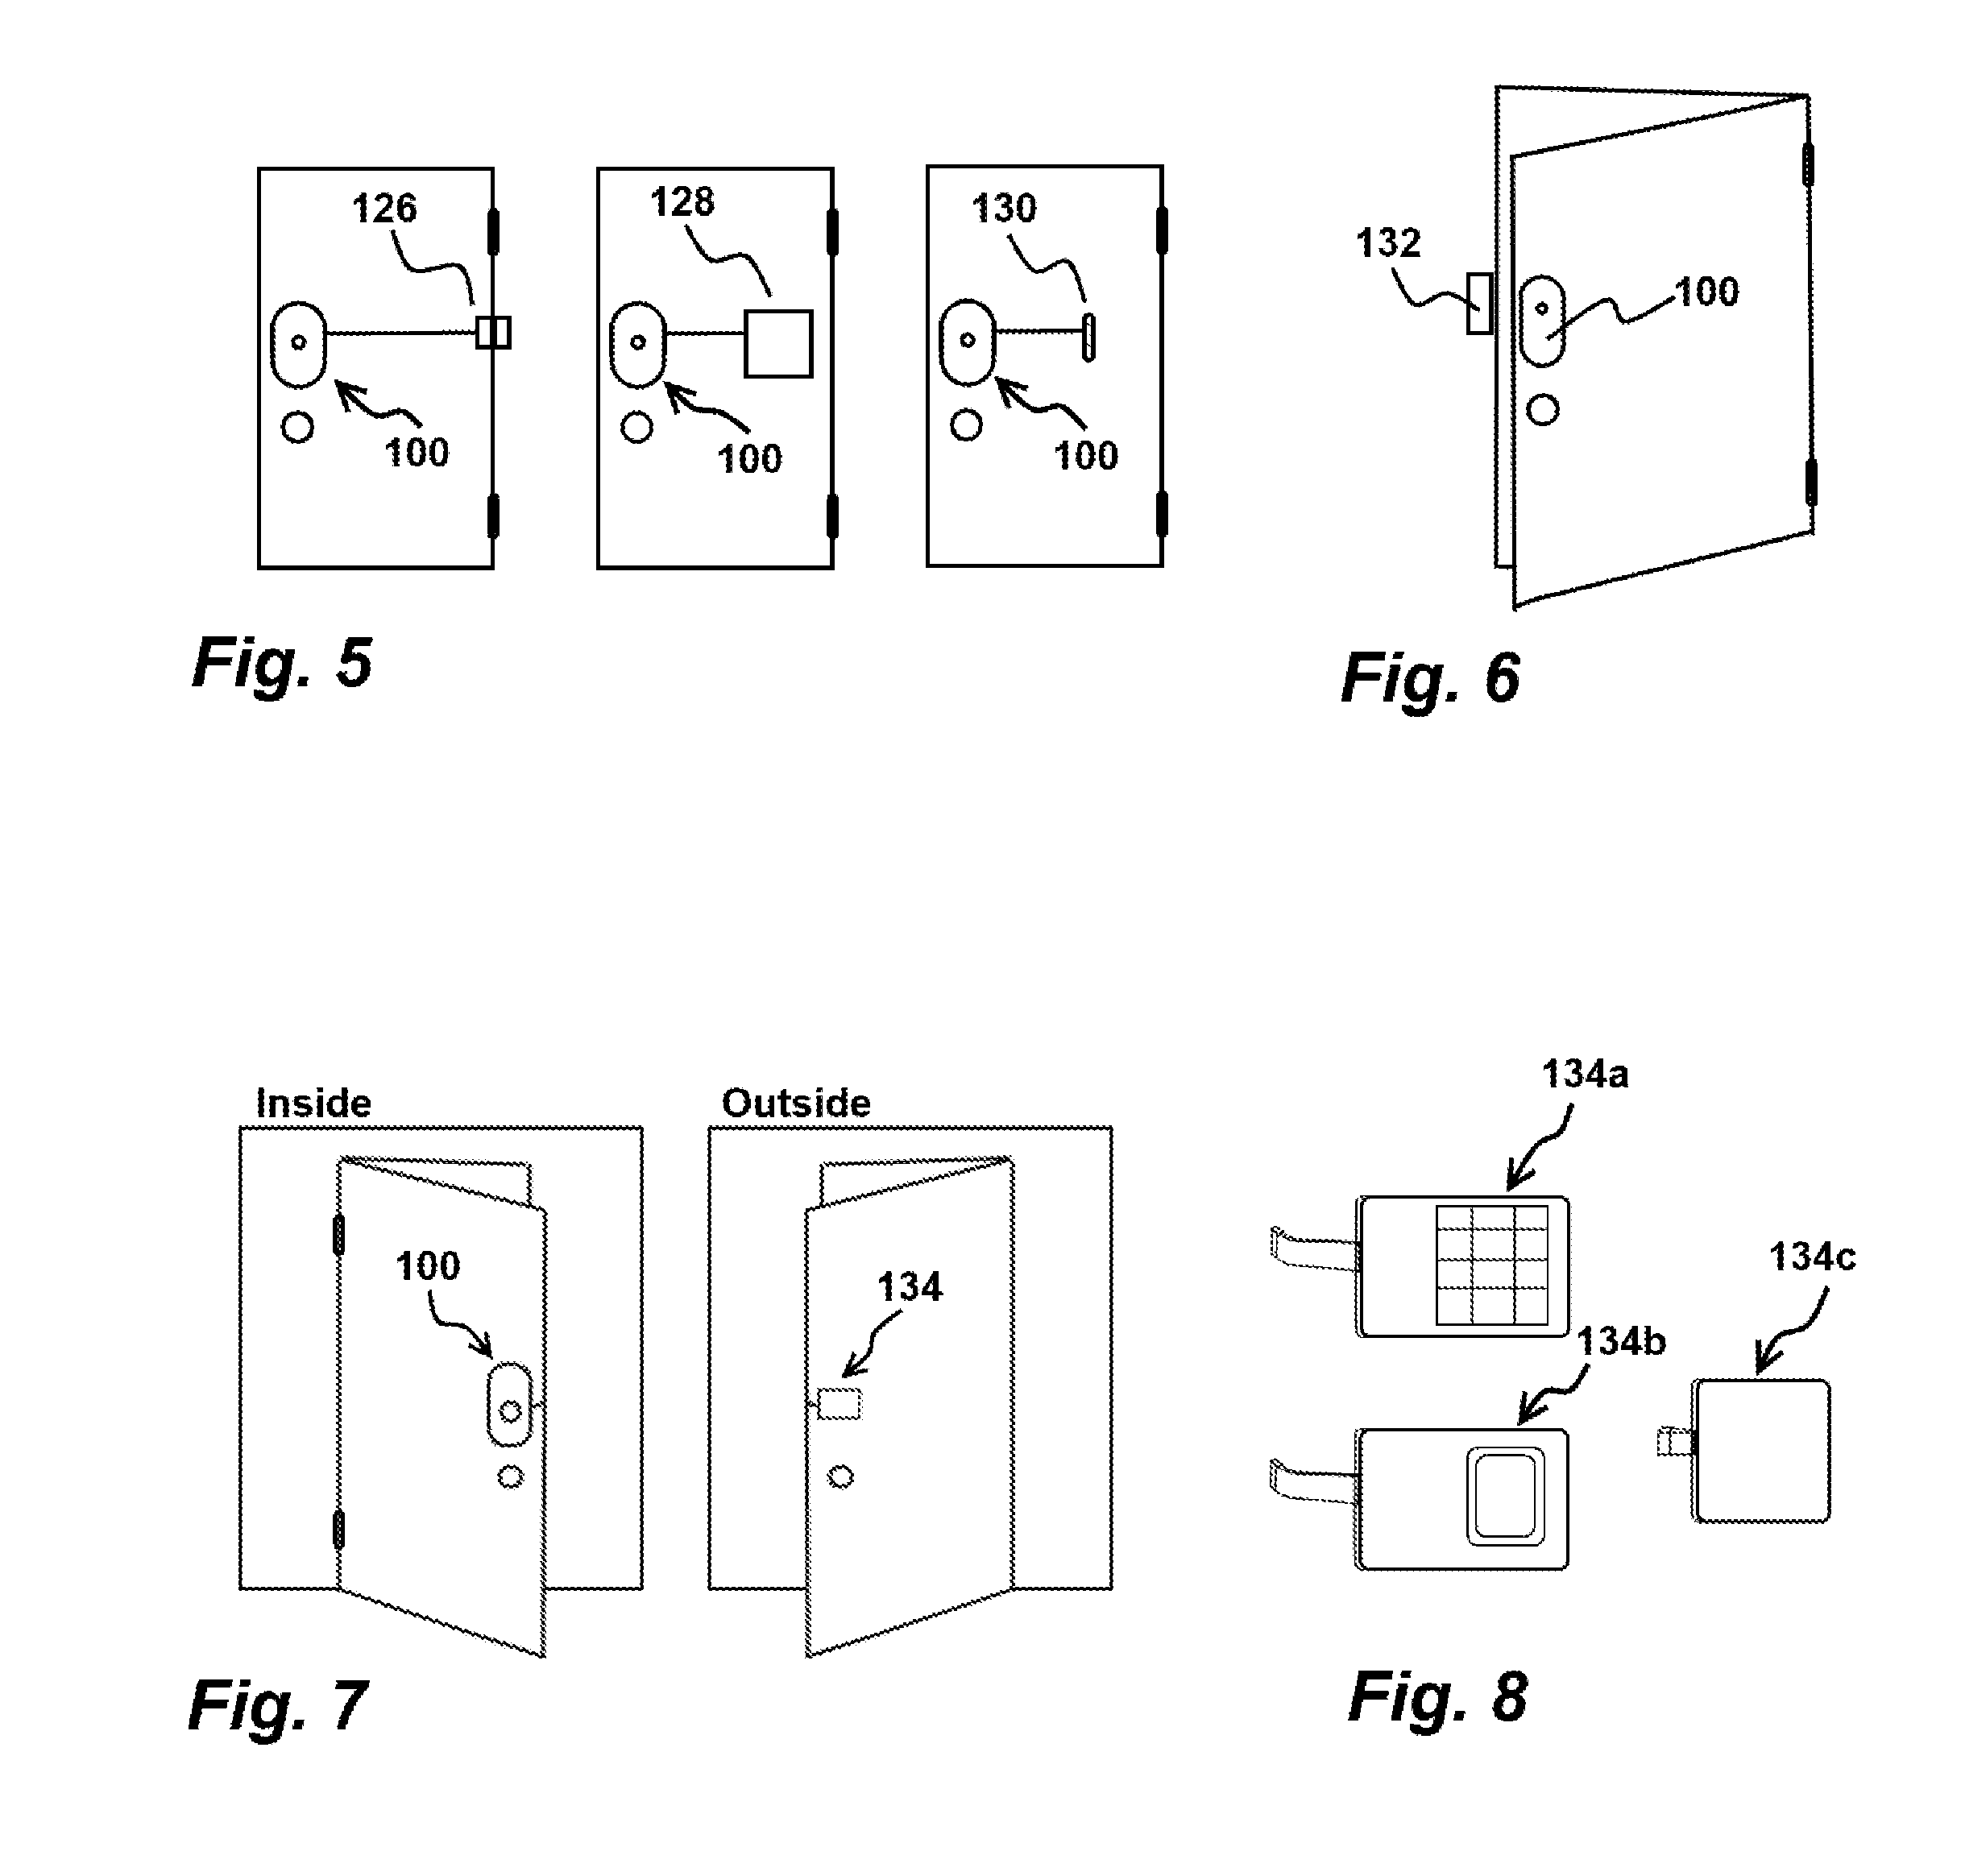 Installation-Free Rechargeable Door Locking Apparatus, Systems and Methods